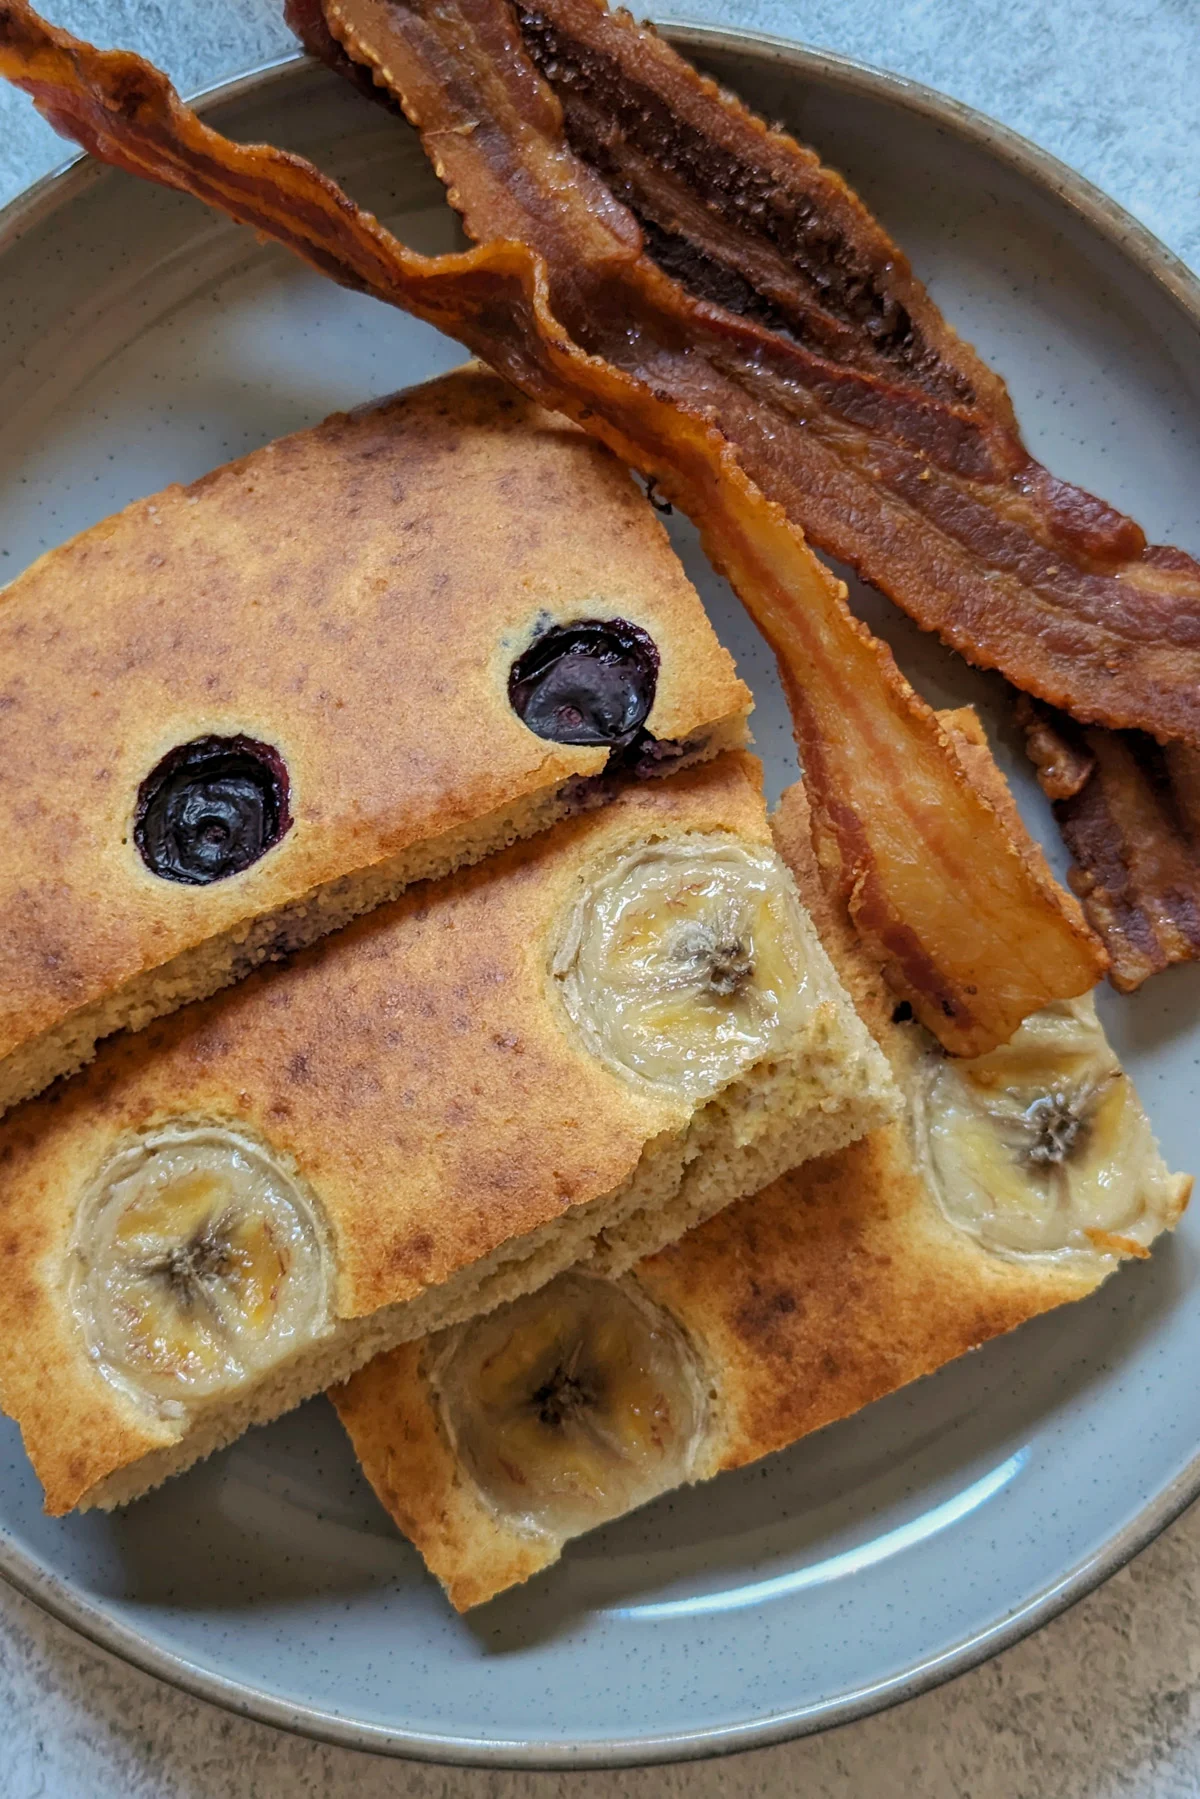 Sheet pan pancakes from mix with bananas and blueberries.